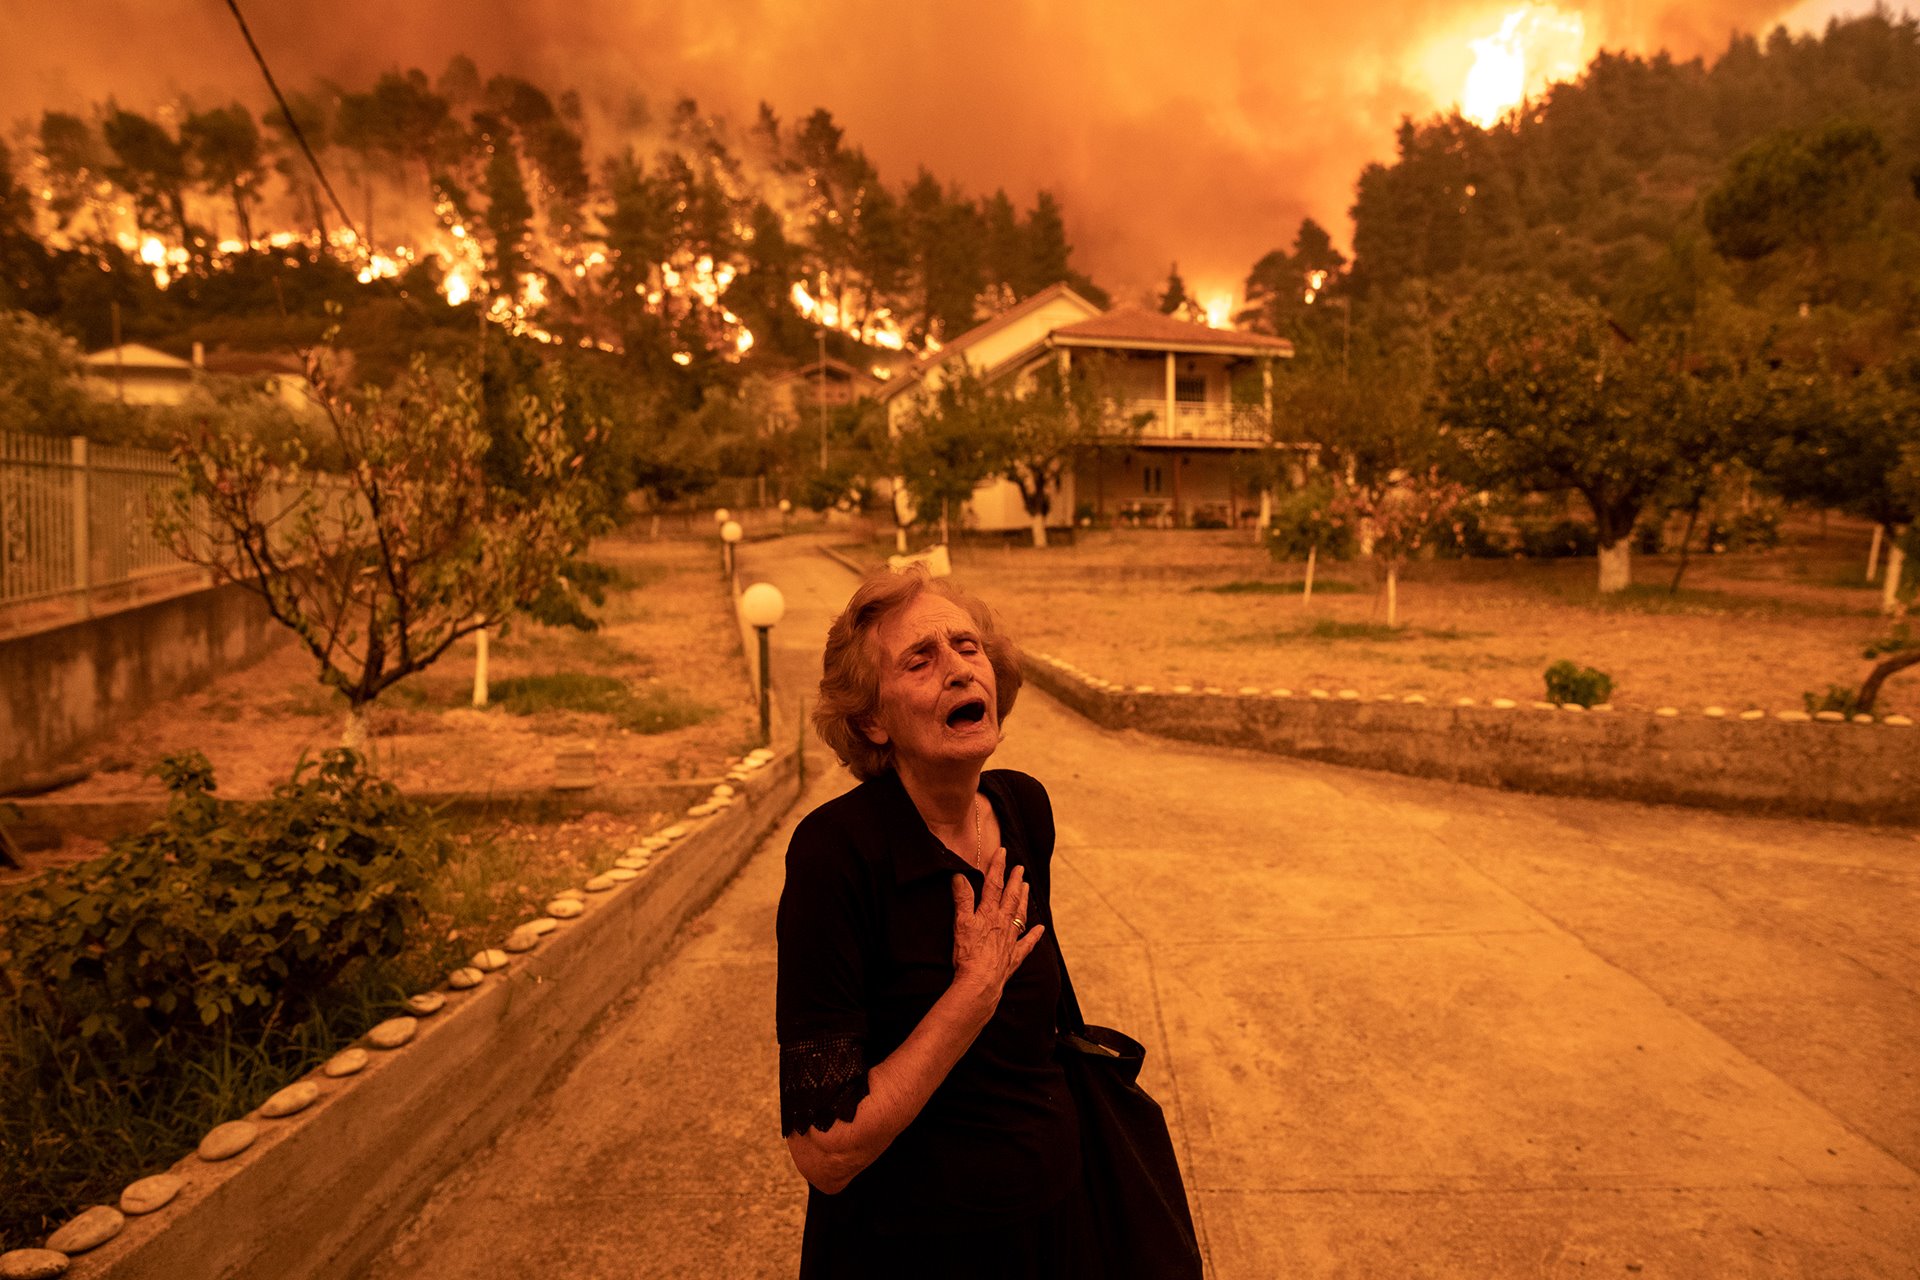 Panayiota Kritsiopi cries out as a wildfire approaches her house in the village of Gouves, on the island of Evia, Greece.